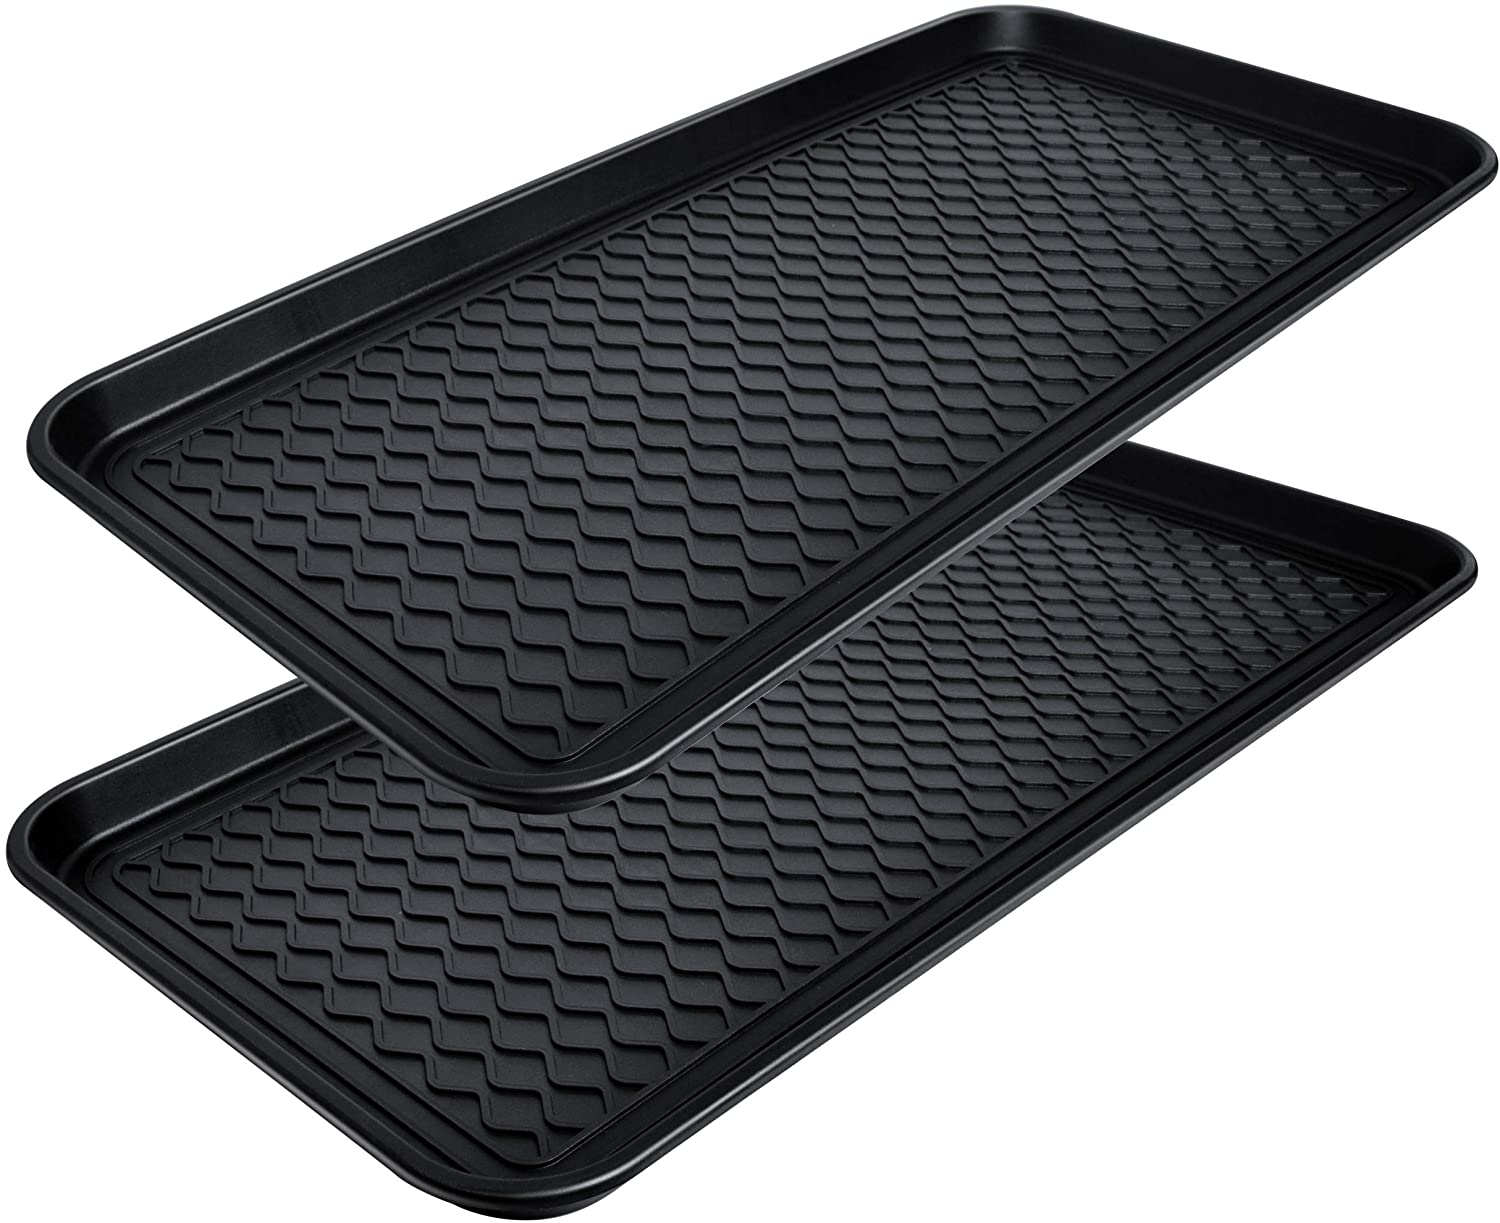 CHAIRLIN All Purpose 30-Inch x 15-Inch Indoor Shoe Tray, 2-Pack